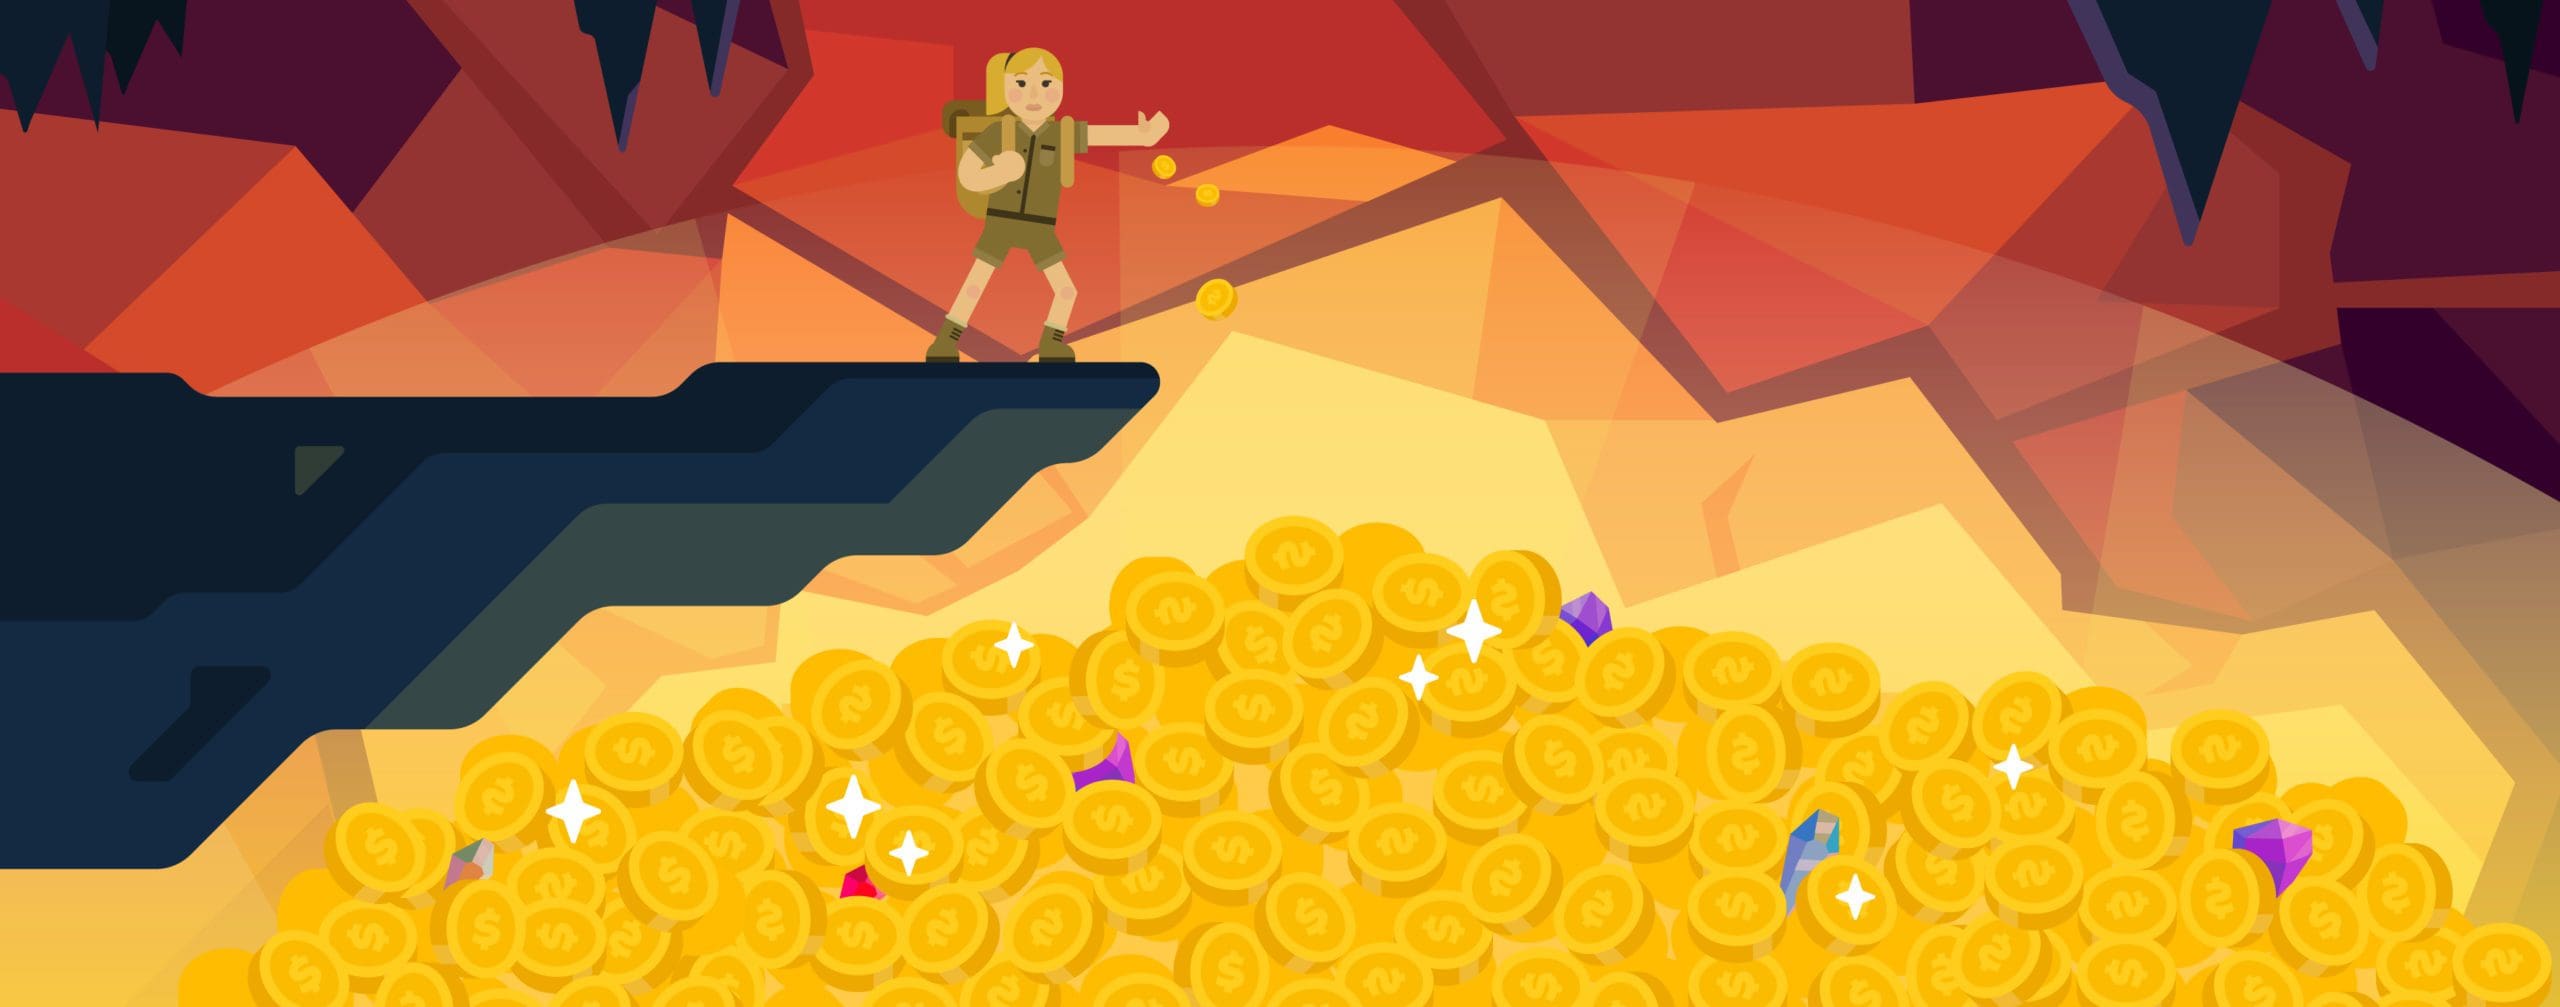 graphic of explorer throwing coins